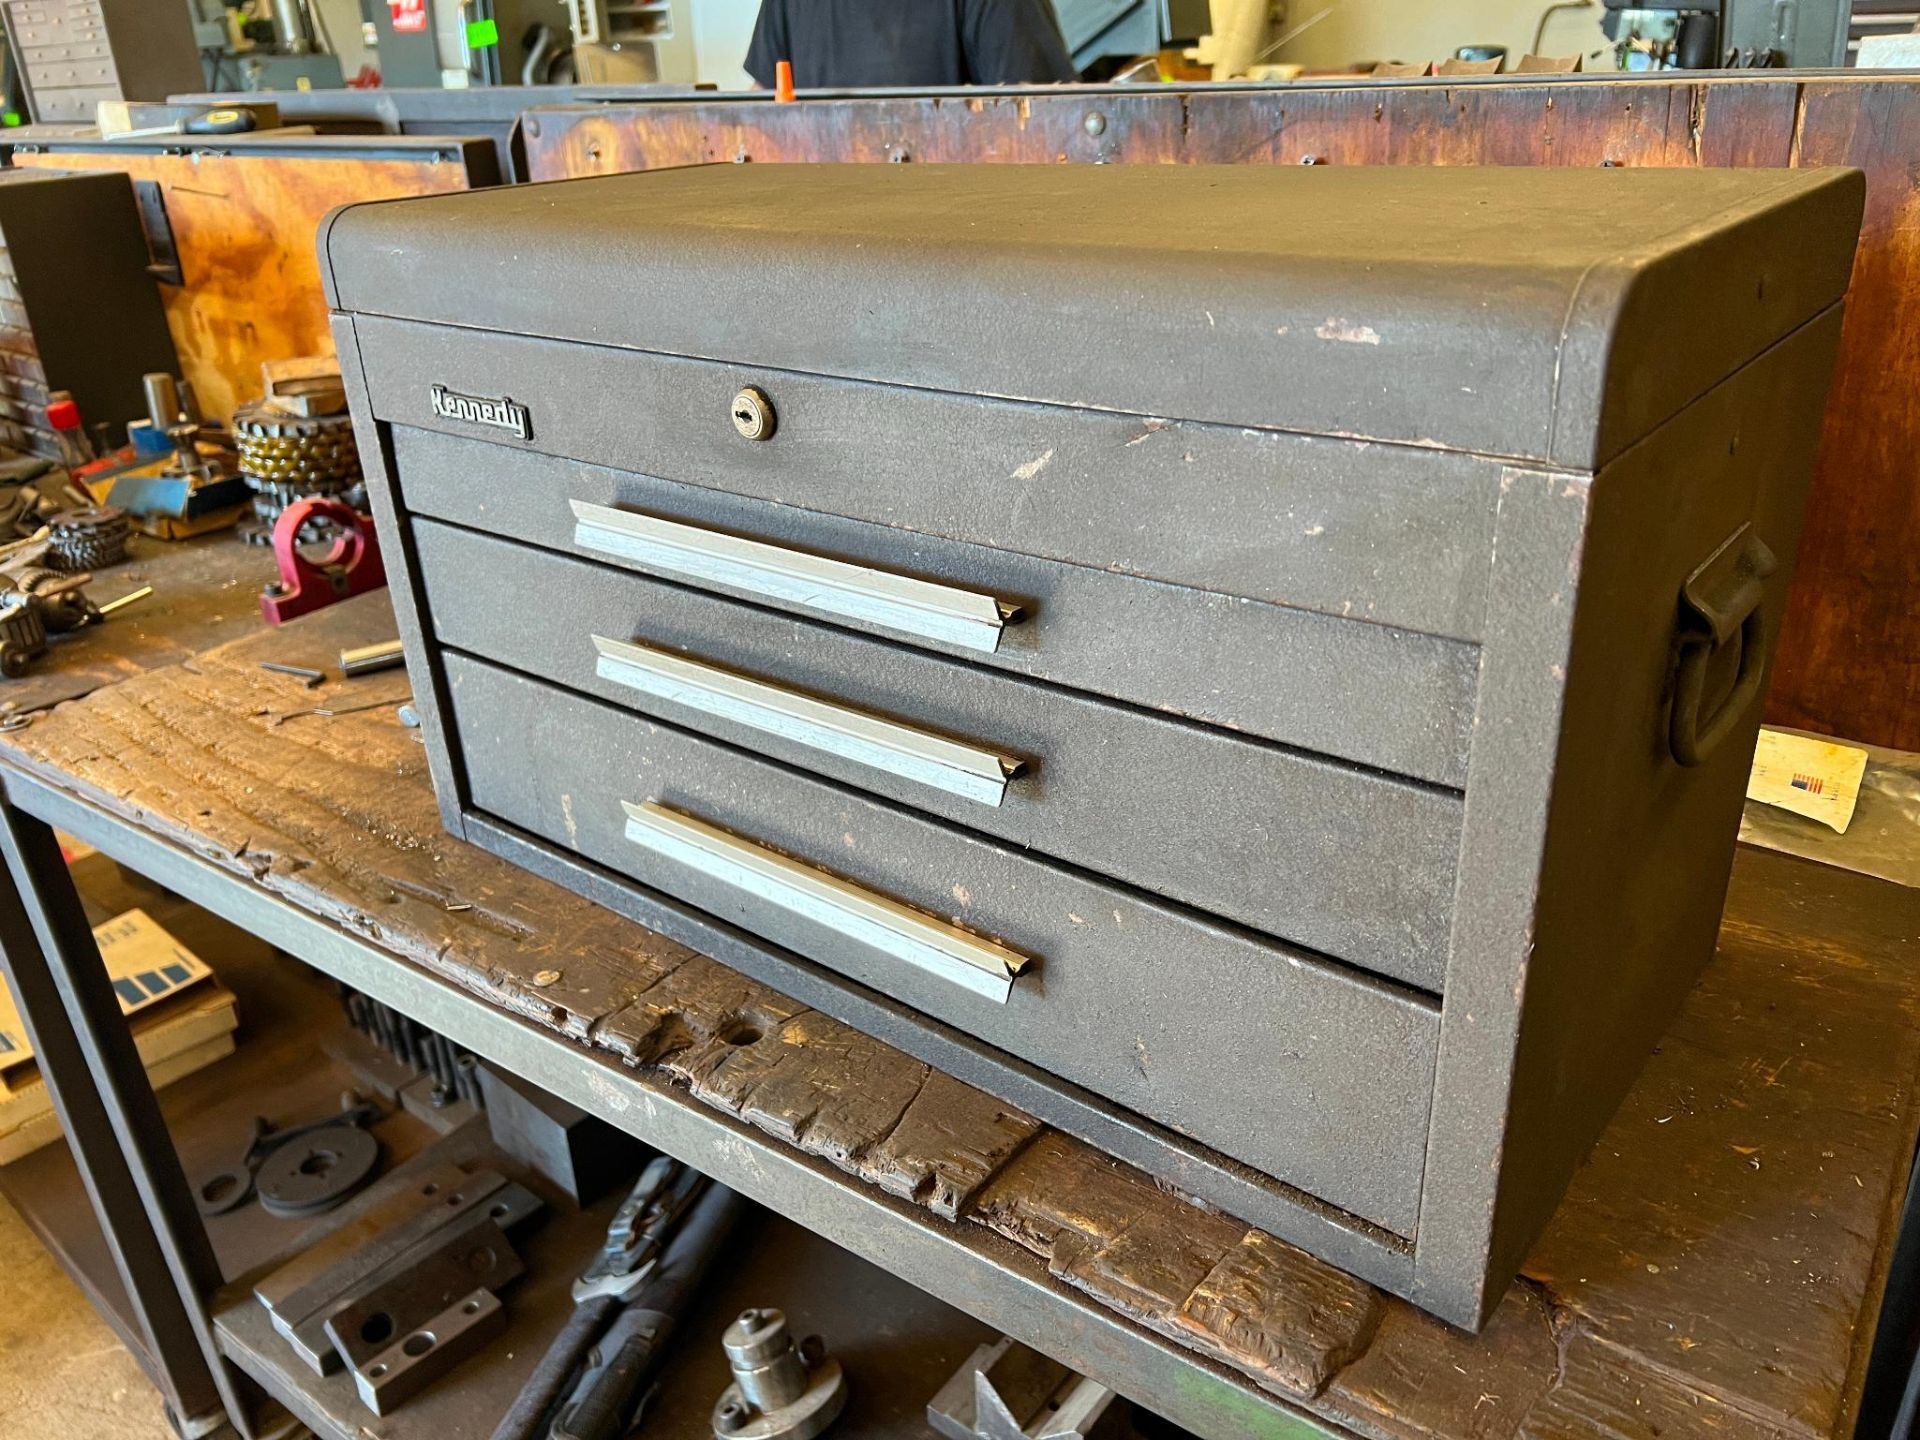 Kennedy Model 263-015030 3-Drawer Mechanics Chest (toolbox) with ALL CONTENTS. to include: Hand tool - Image 3 of 15